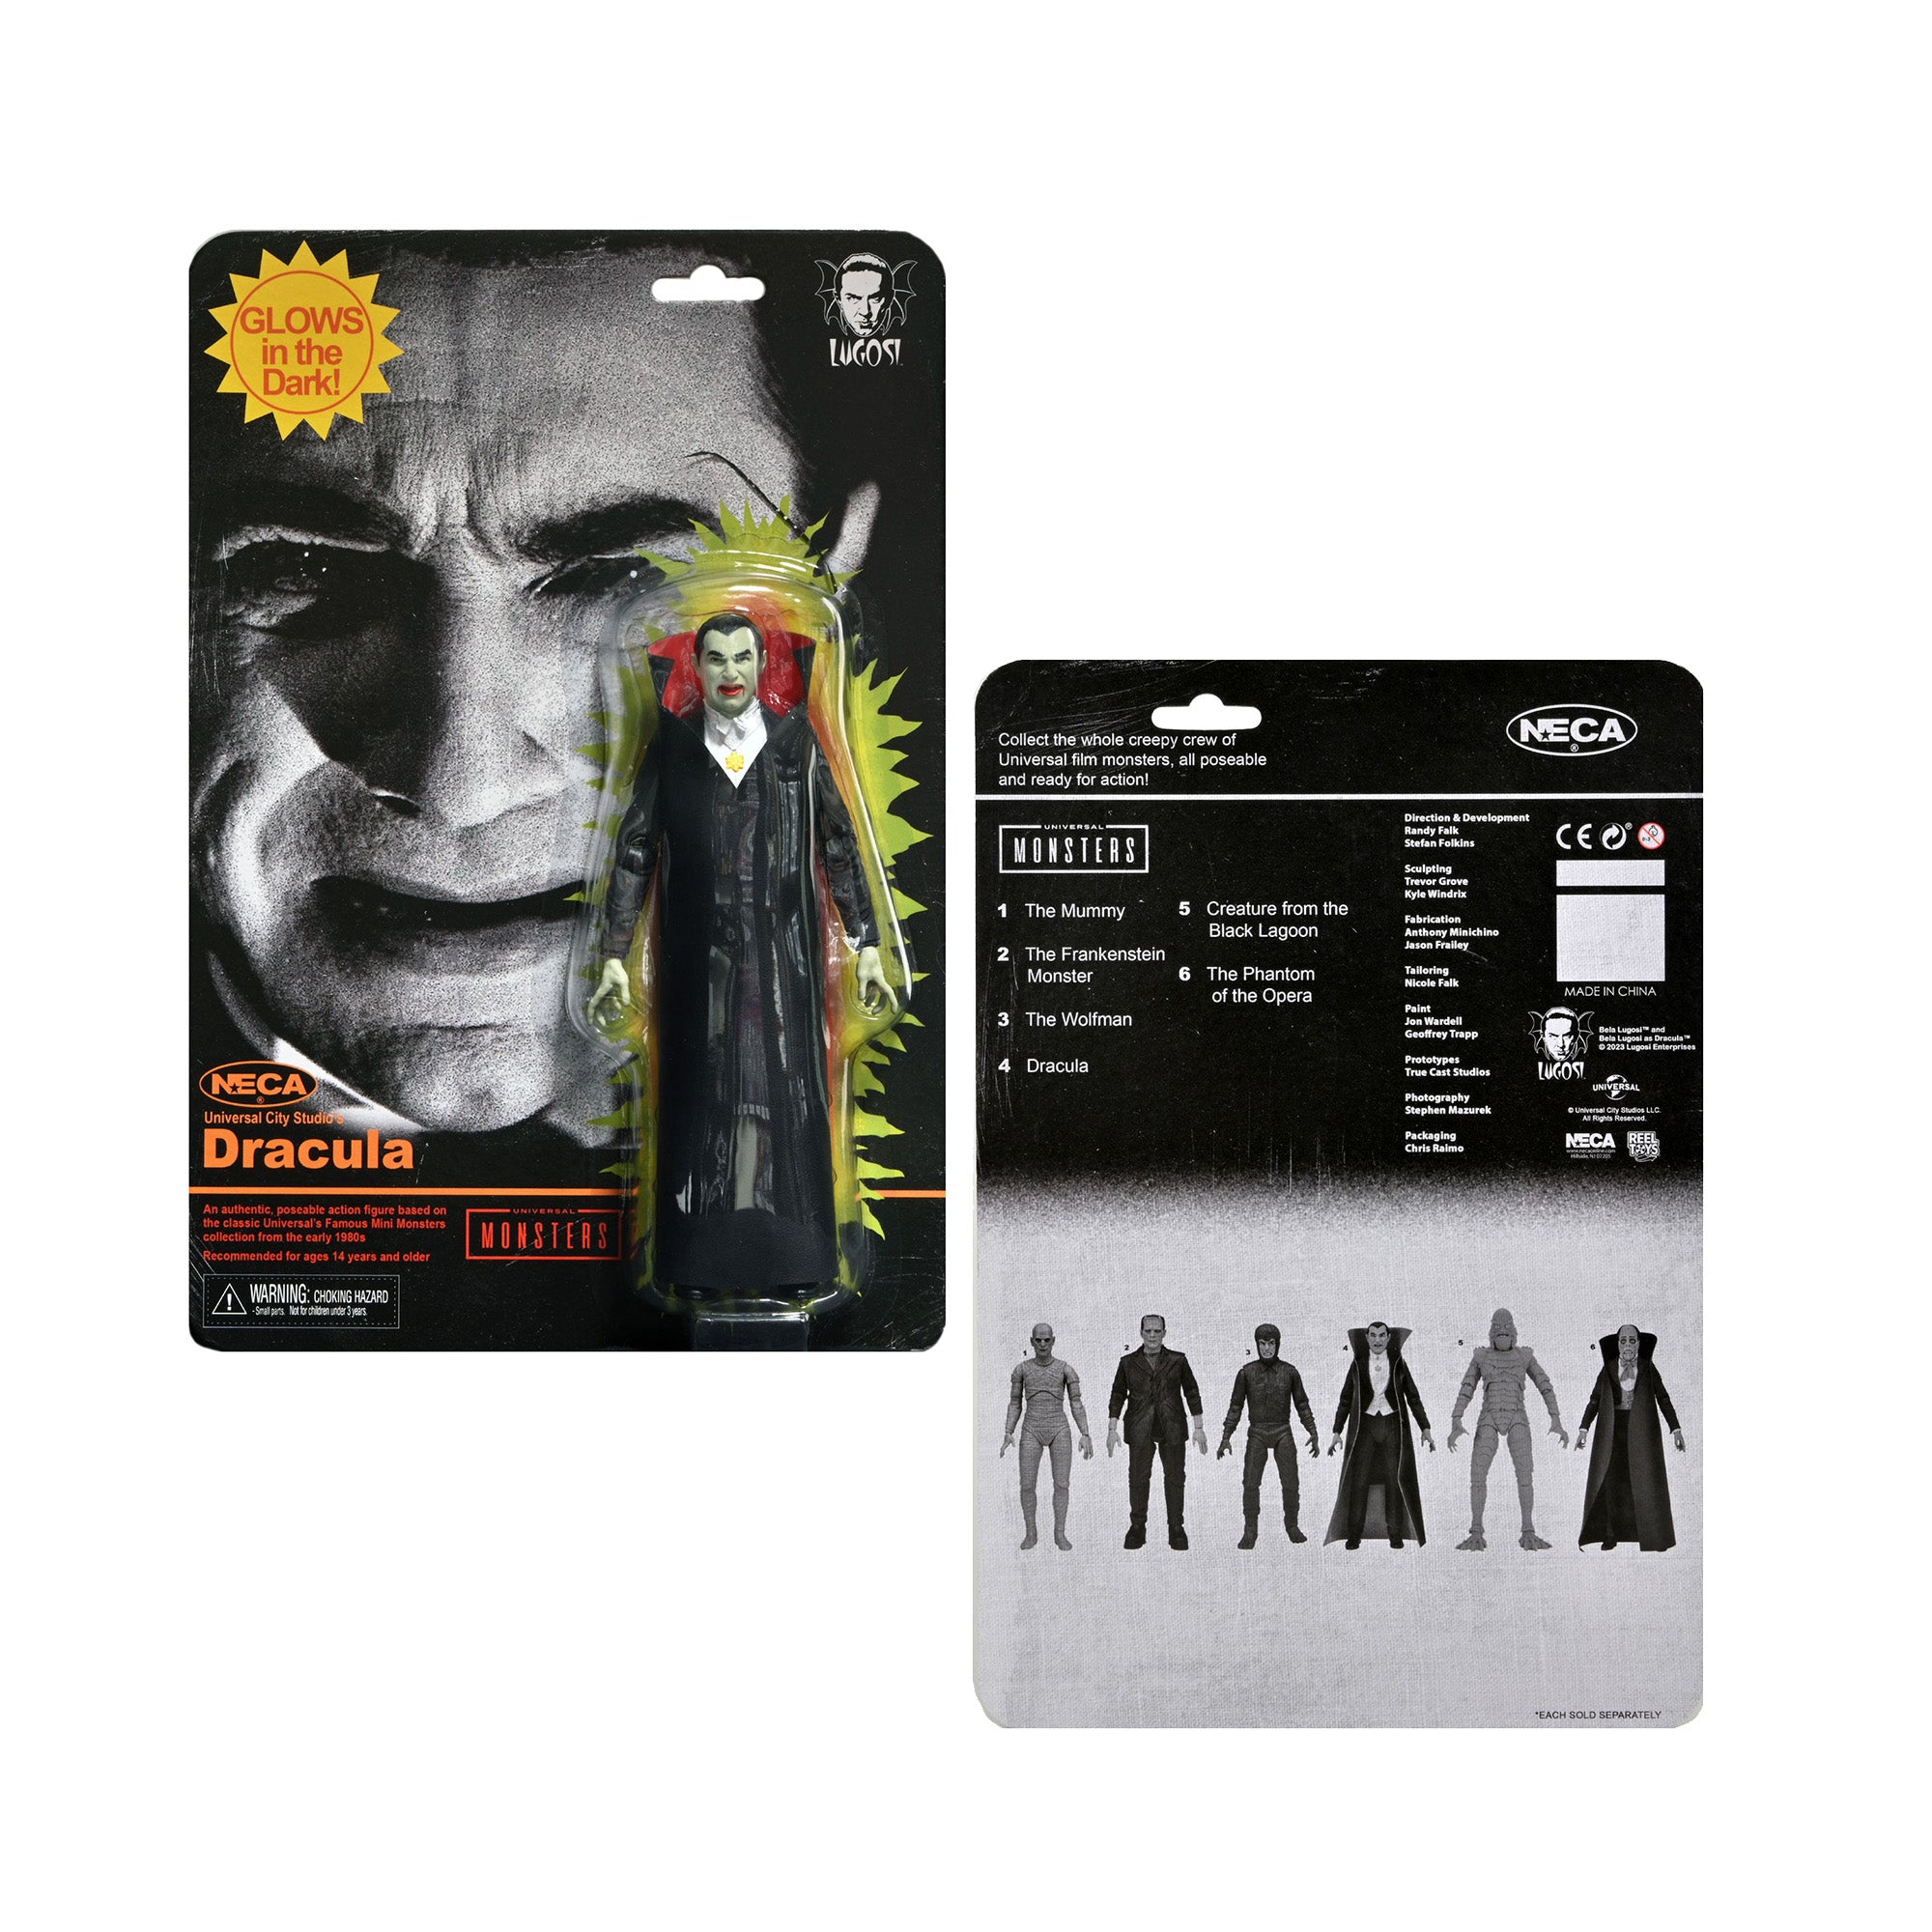 Universal Monsters - Glow-in-the-Dark Retro Dracula 7” Scale Action Figure Packaging Front and Back